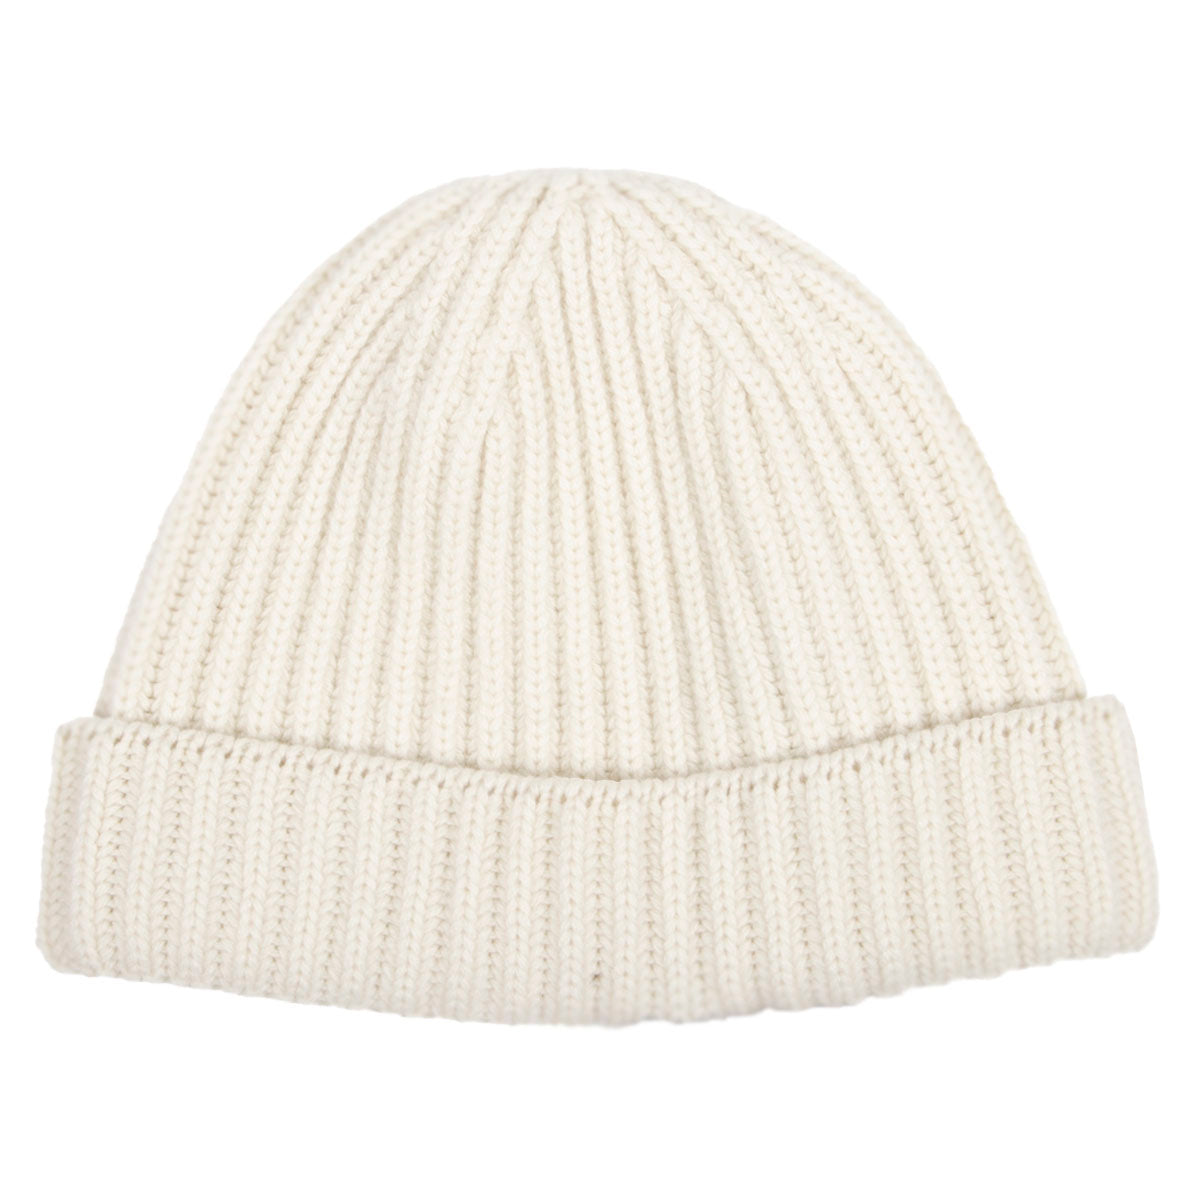 Fisherman Knit 8ply Cashmere Hat - White Undyed  Robert Old   